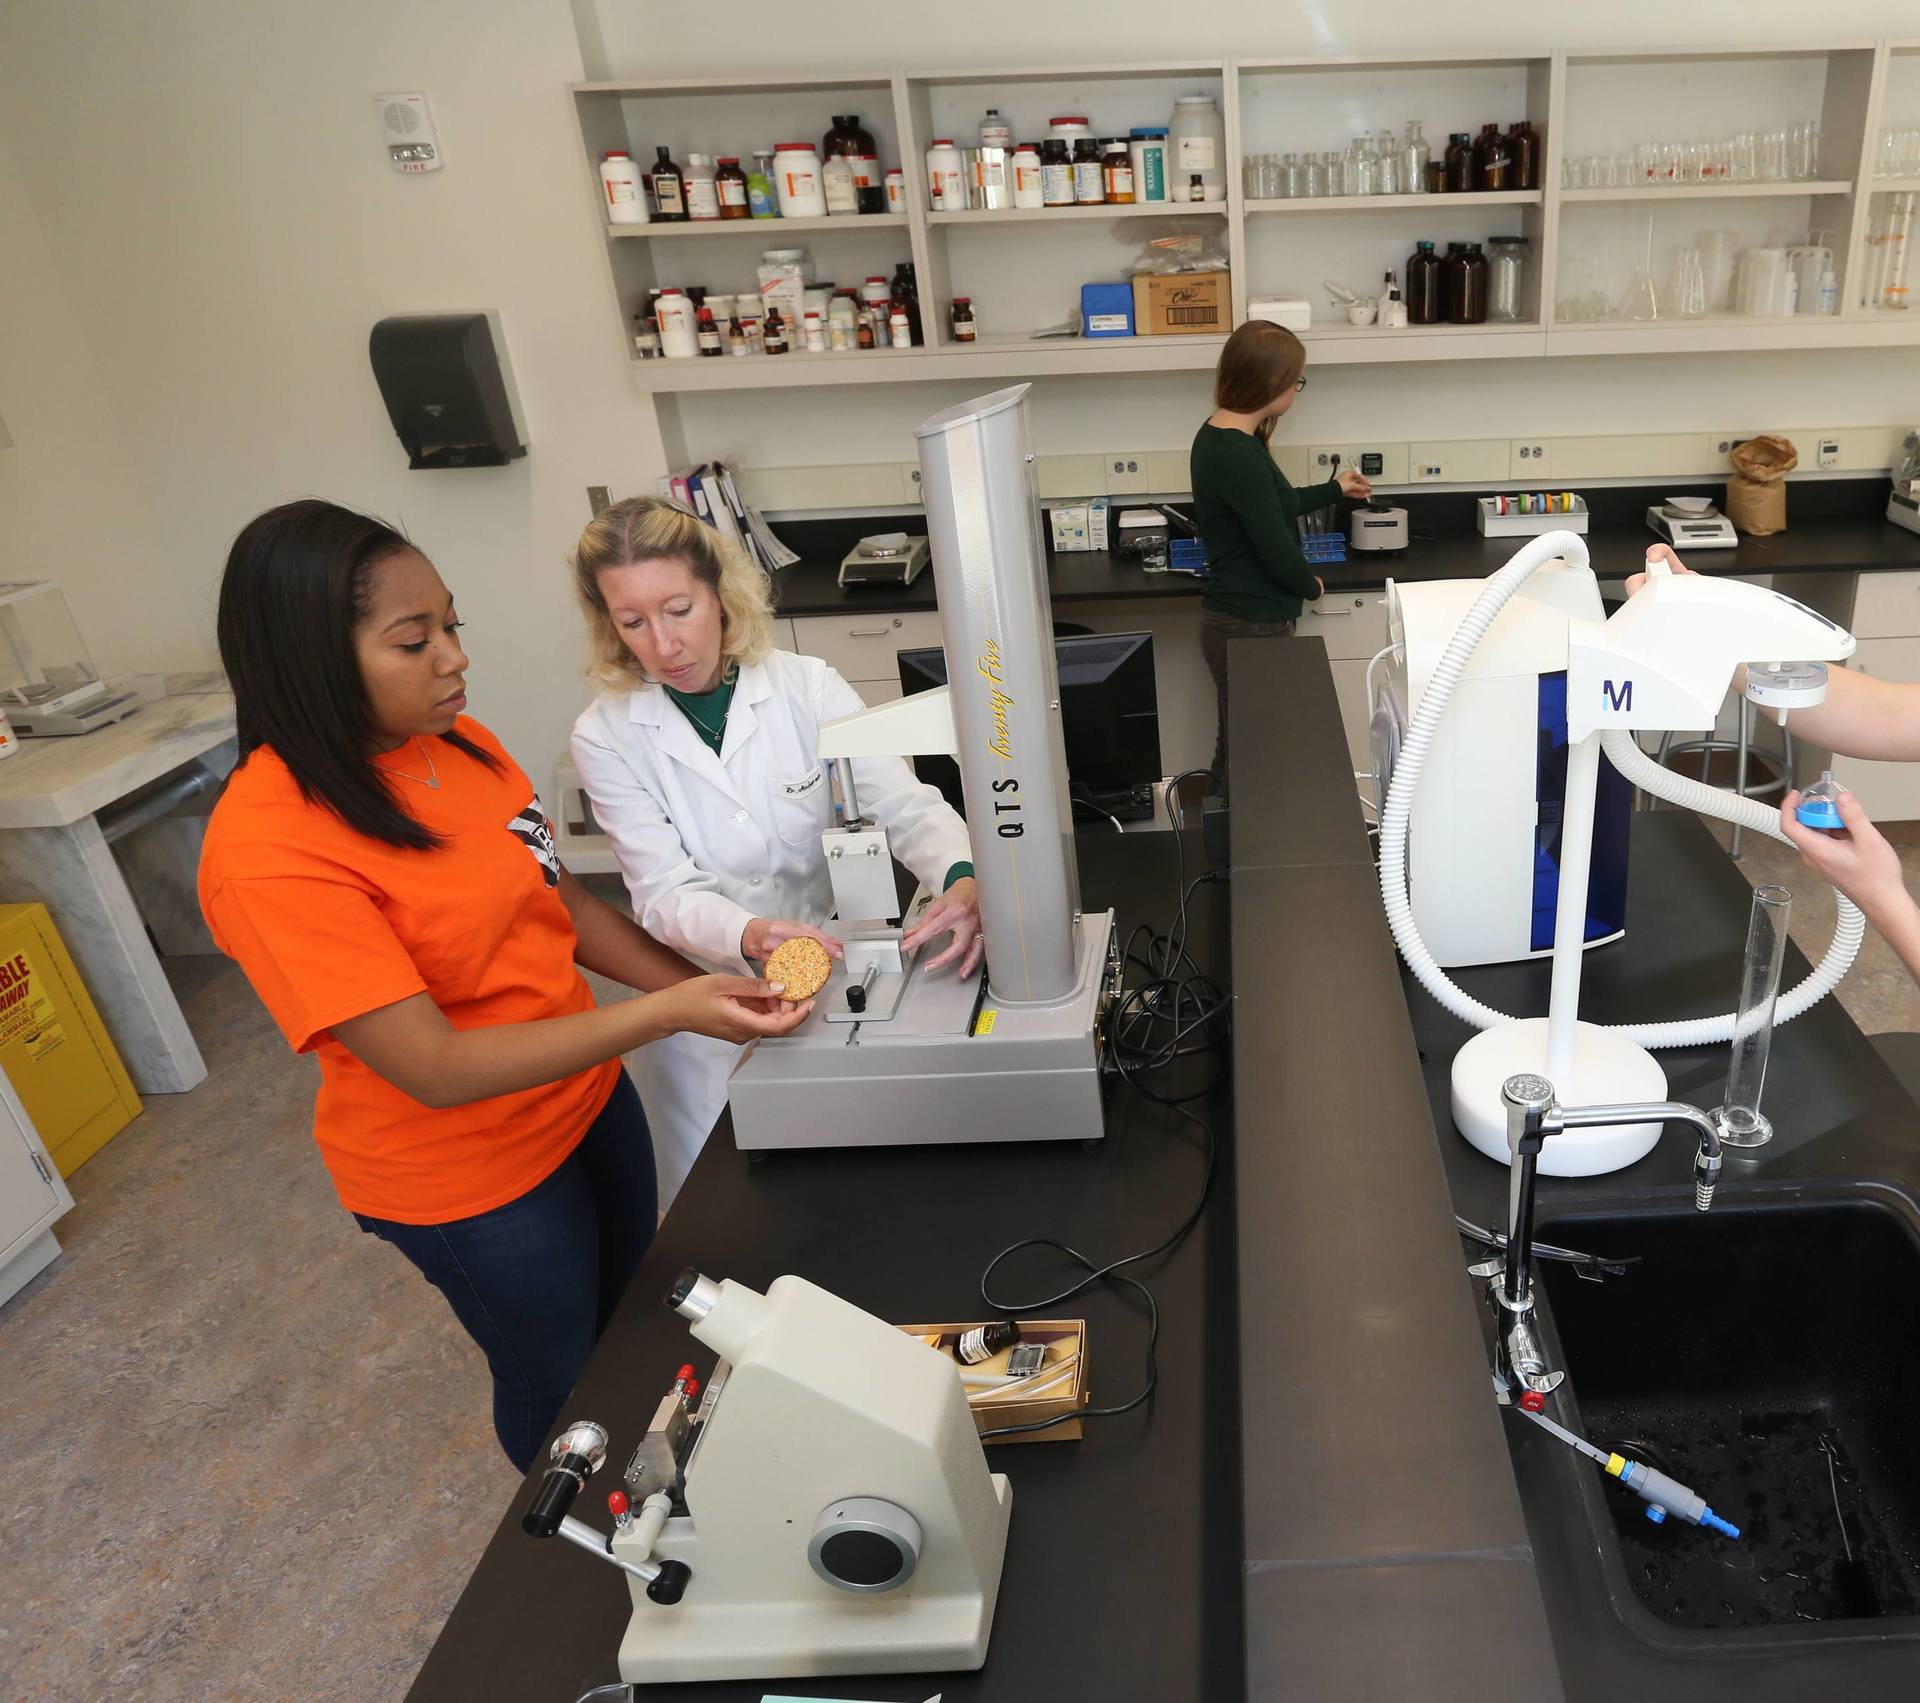 Three BGSU students in an on-campus food science lab examine a solution with a professor. Study Food and nutrition online, or on campus.